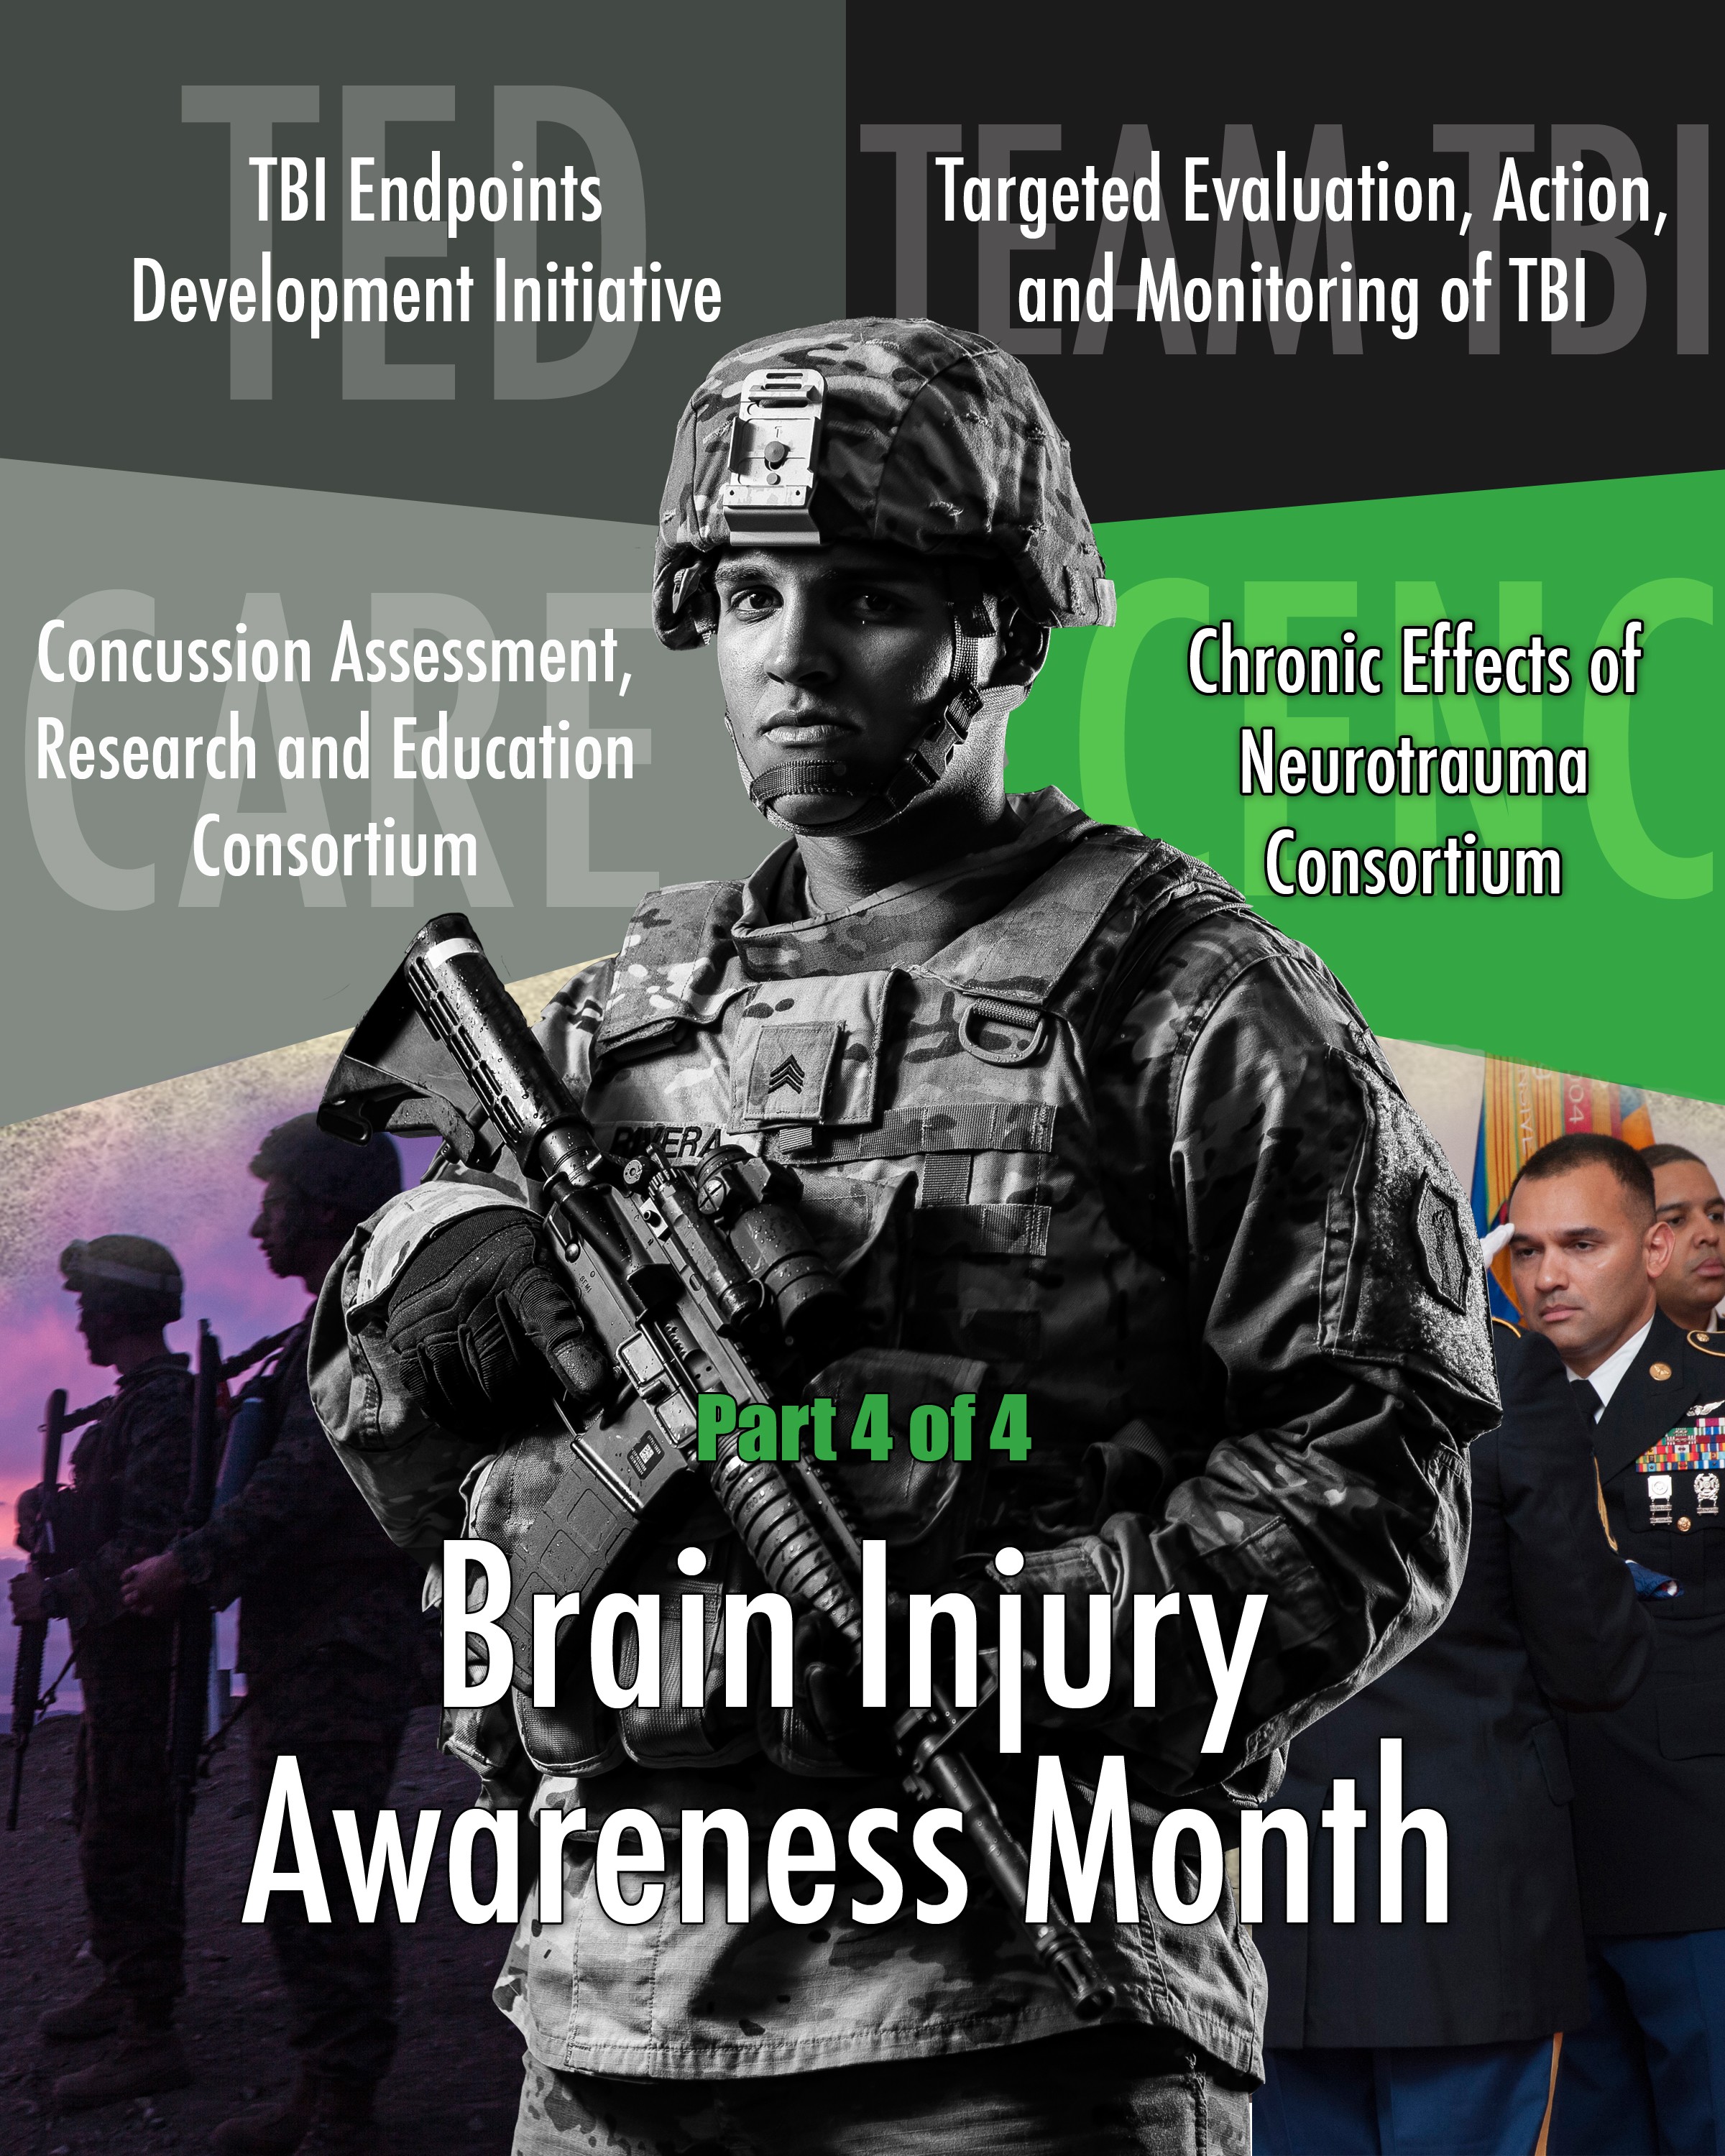 What Is Tbi Awareness